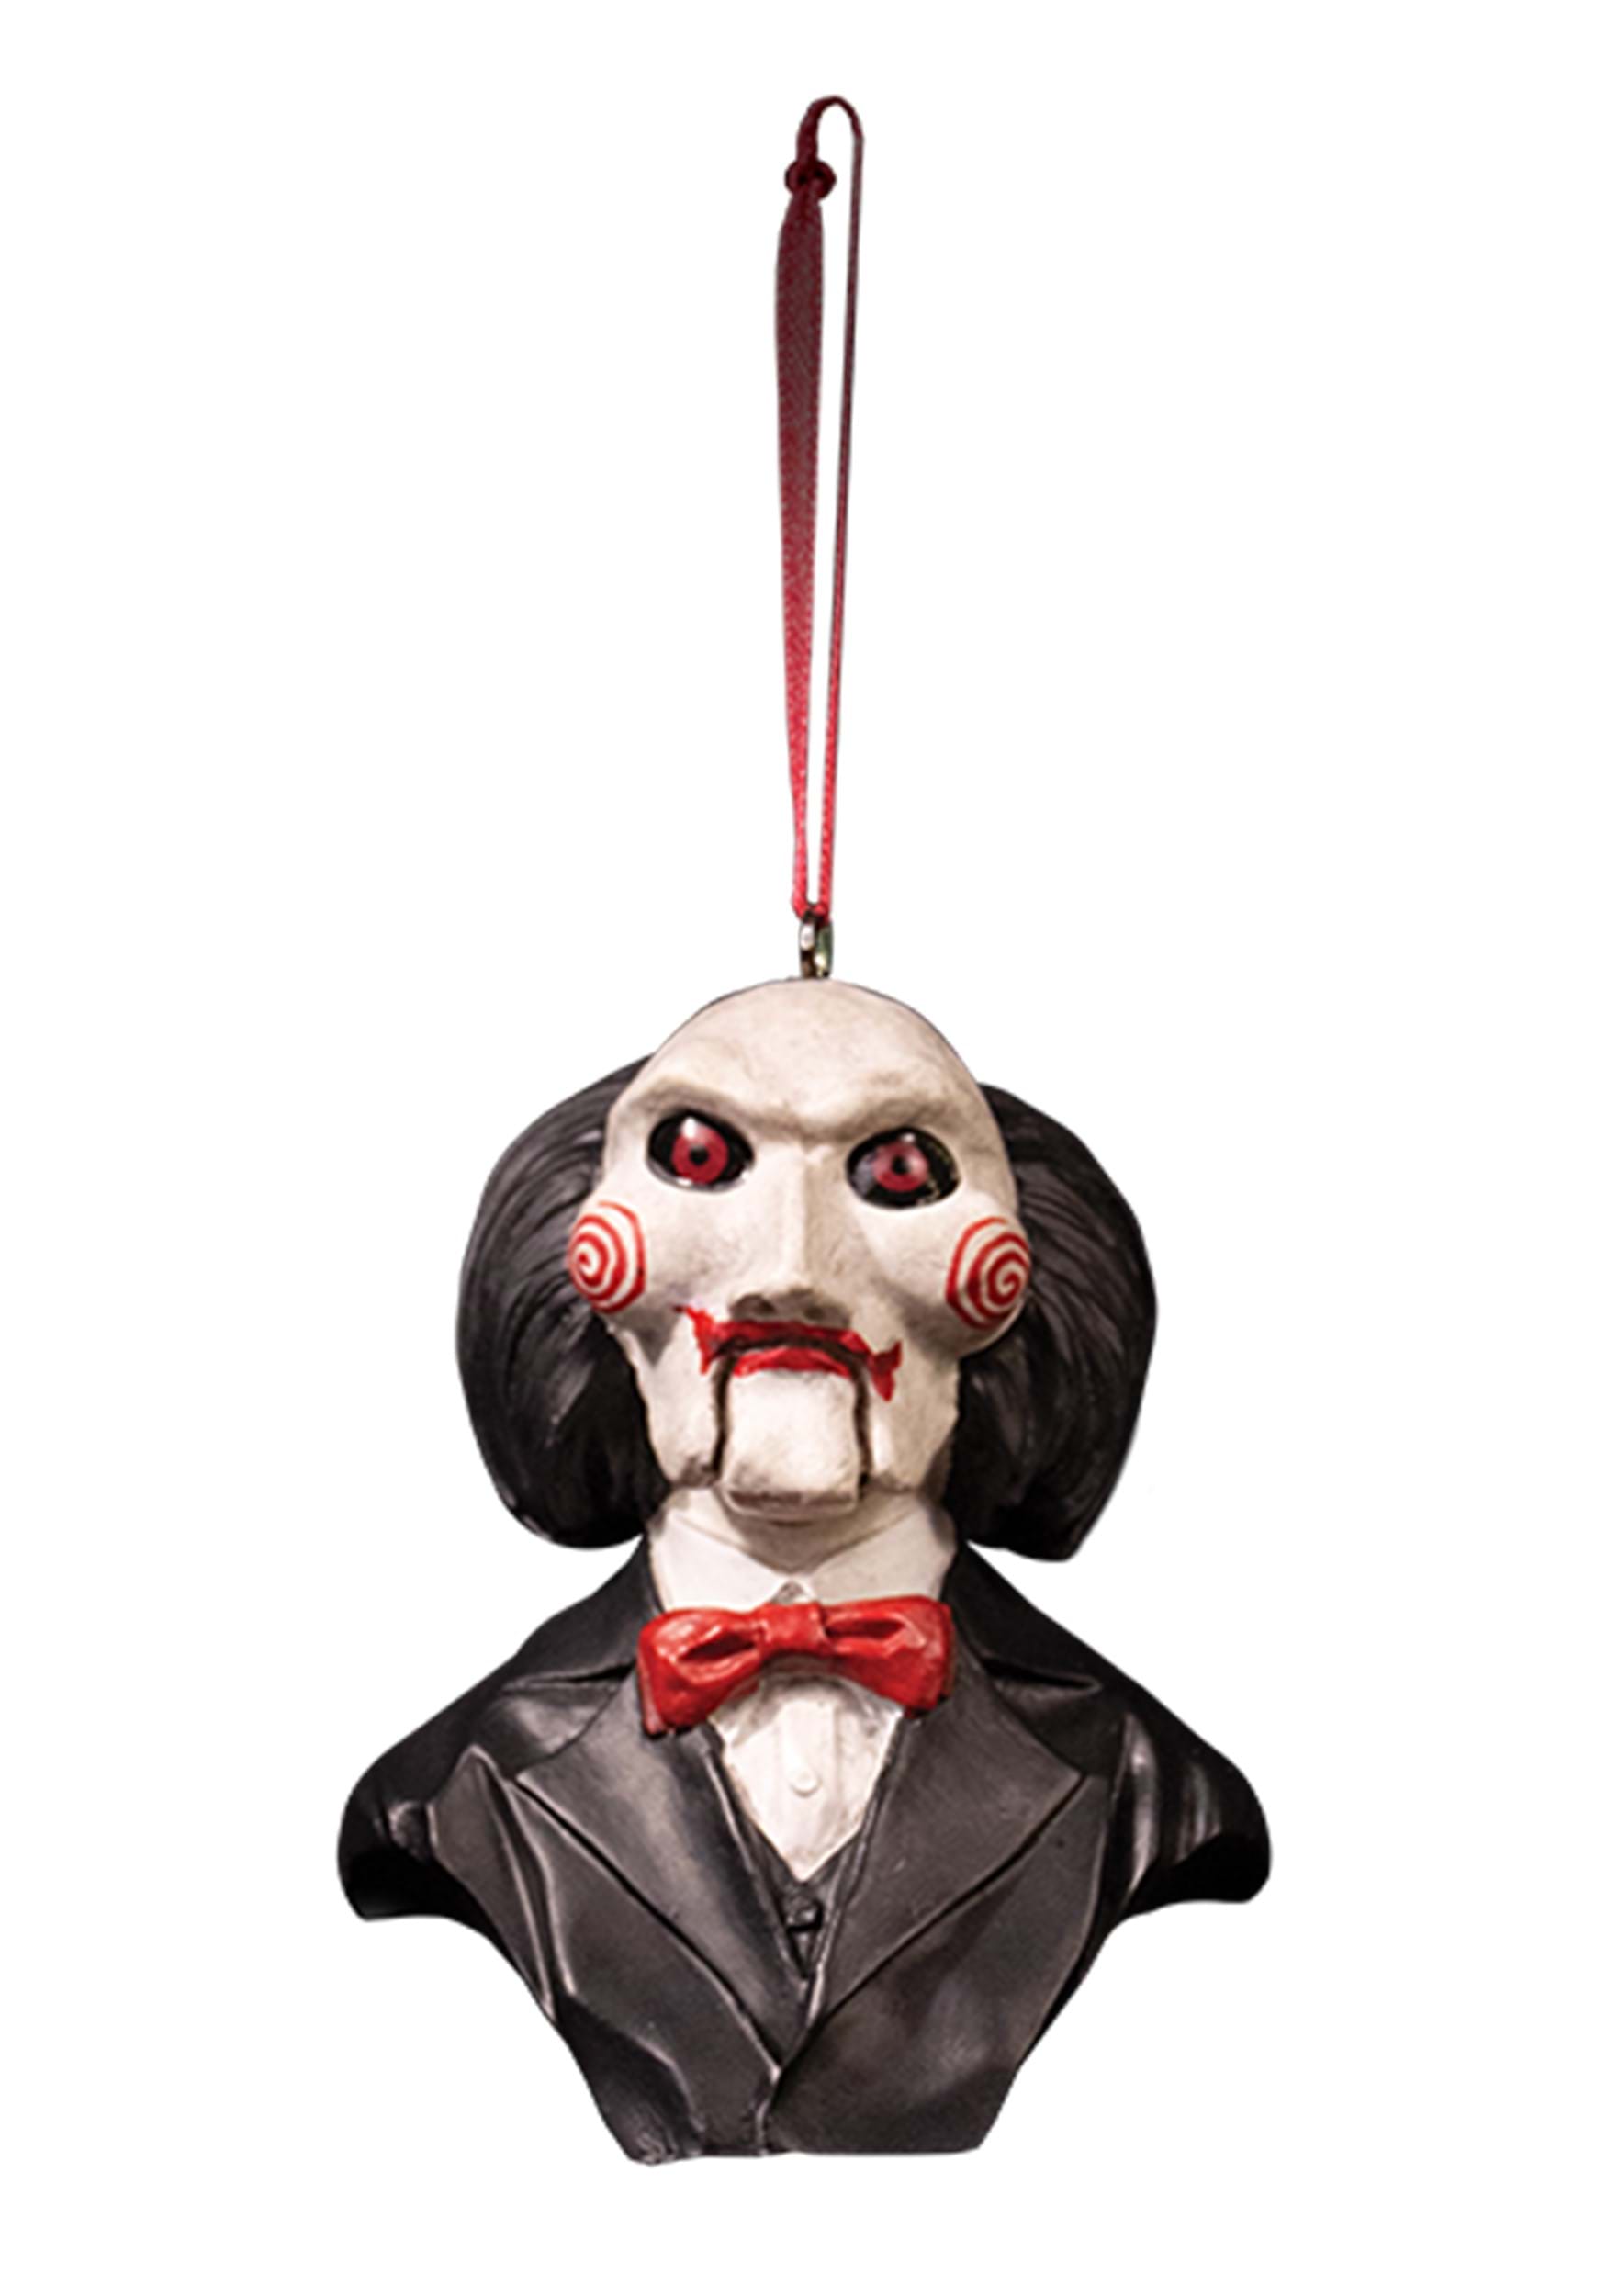 Ornament of Saw Billy